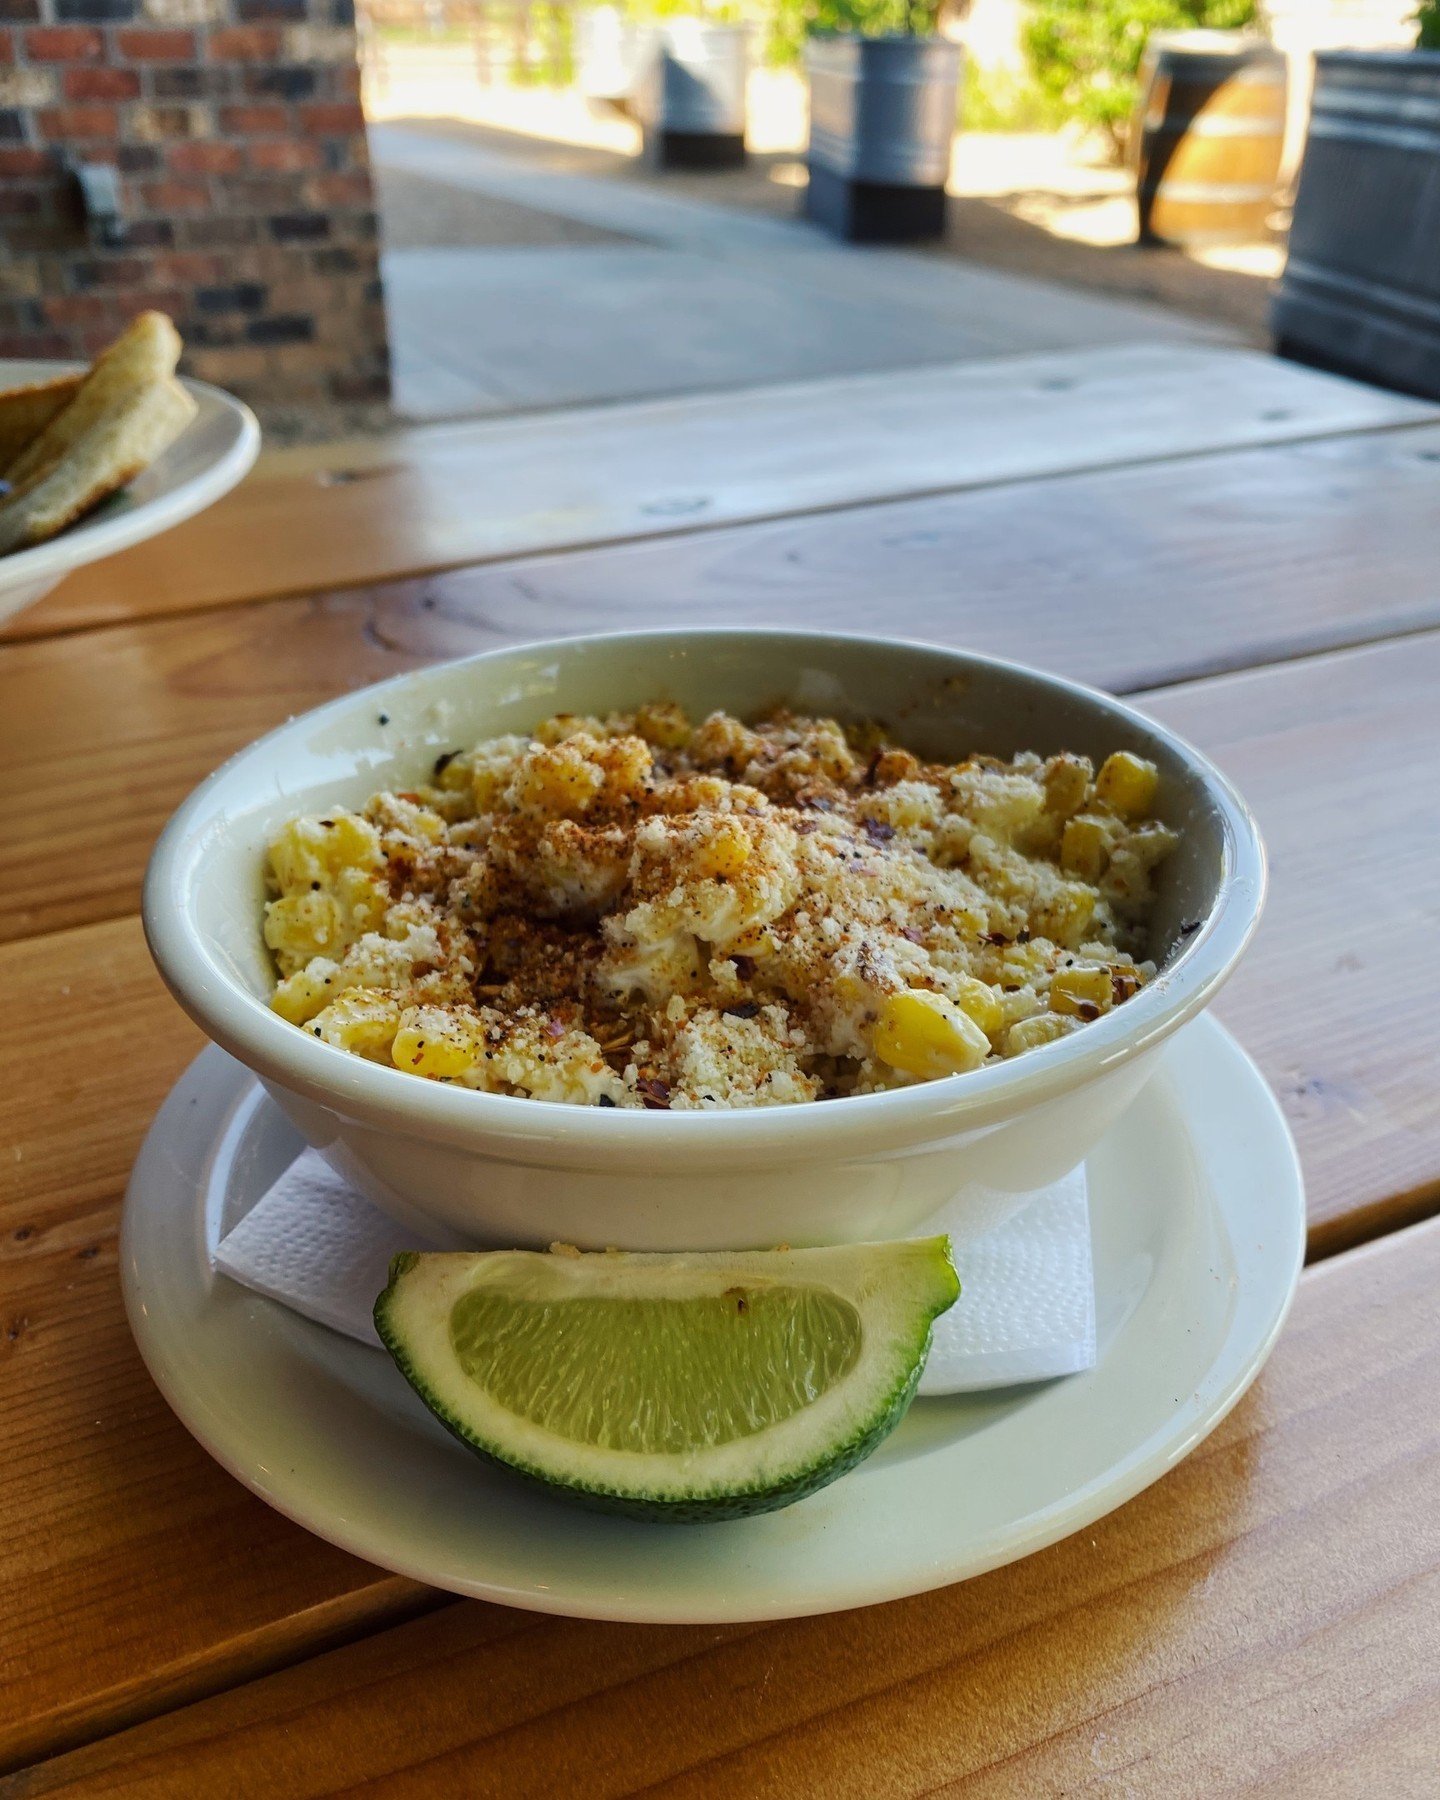 Our kitchen has made the most delicious Esquites (Elote in a Cup) for Cinco de Mayo! 

Yellow corn tossed in a mayo &amp; sour cream mix drizzled with creamy queso fresco and tamarind seasoning. Served cold and great as an appetizer to share, but so 